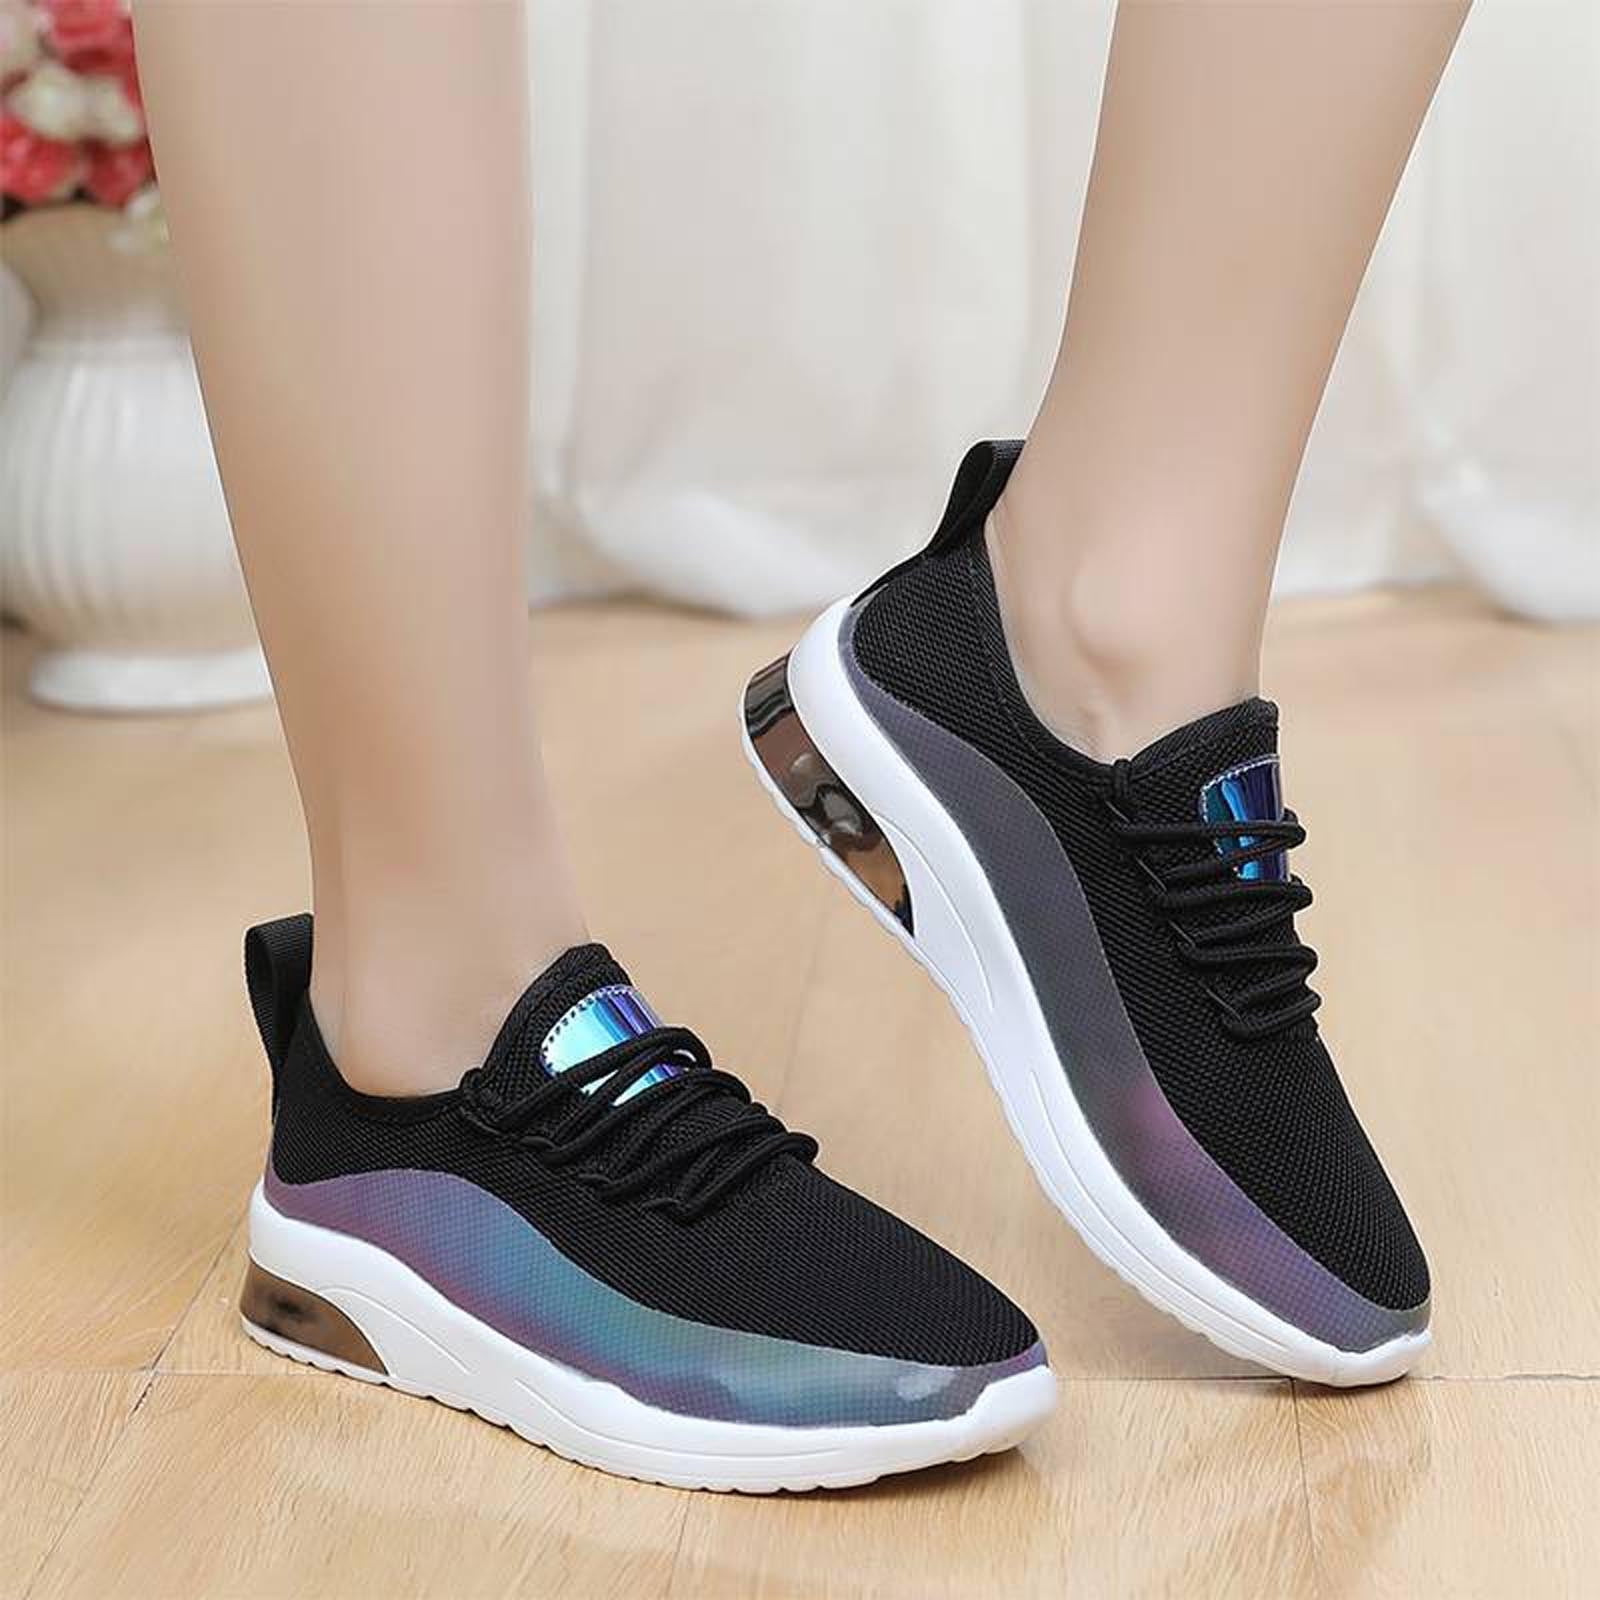 Women's Orthopedic Mesh Sneakers, Breathable Stretch Platform Walking  Shoes, Comfortable Casual Fash…See more Women's Orthopedic Mesh Sneakers